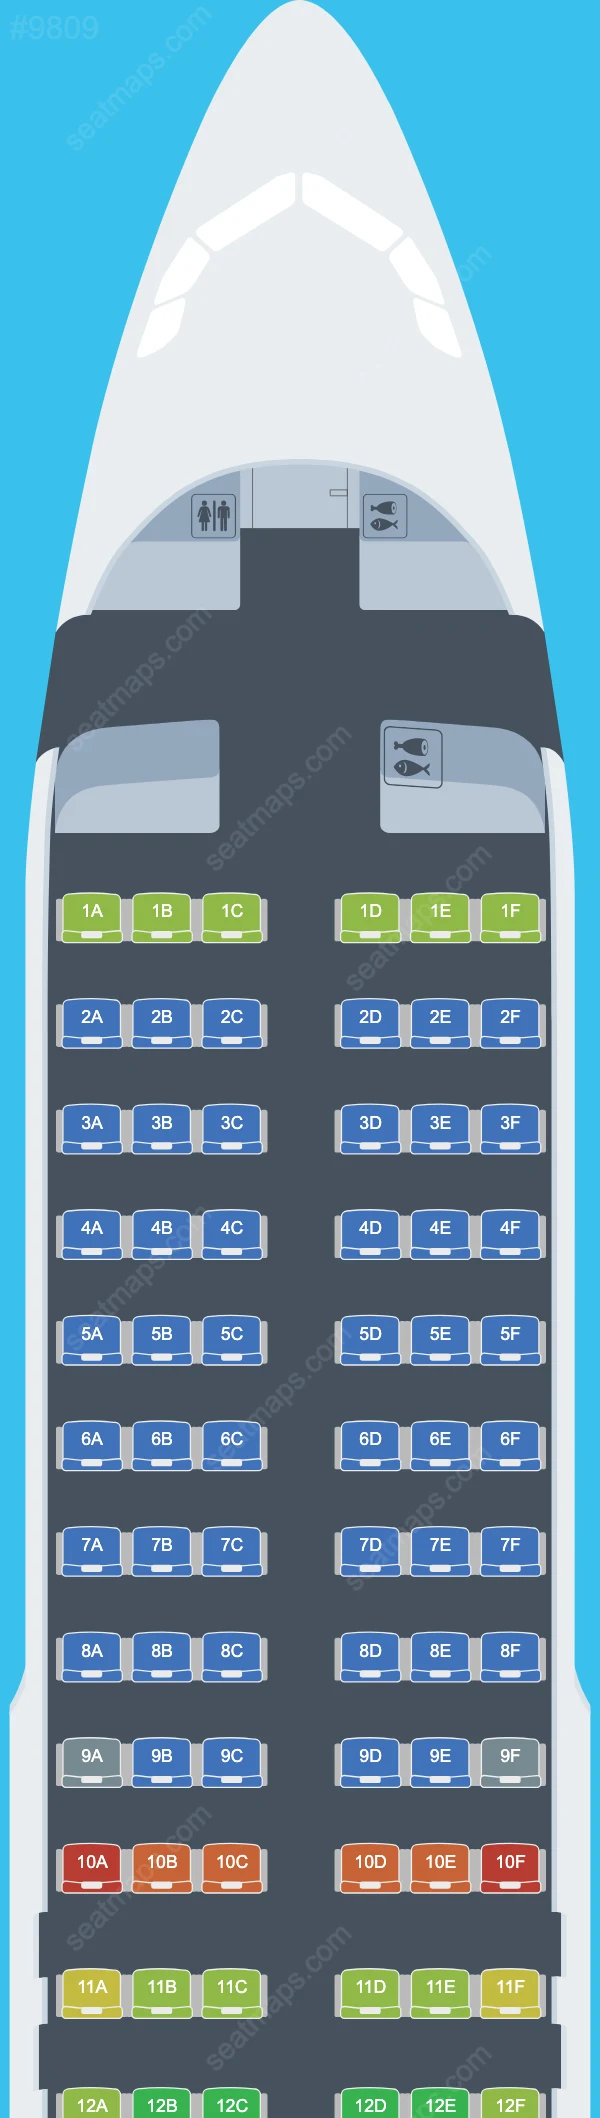 Aegean Airlines Airbus A320 Seat Maps A320-200neo